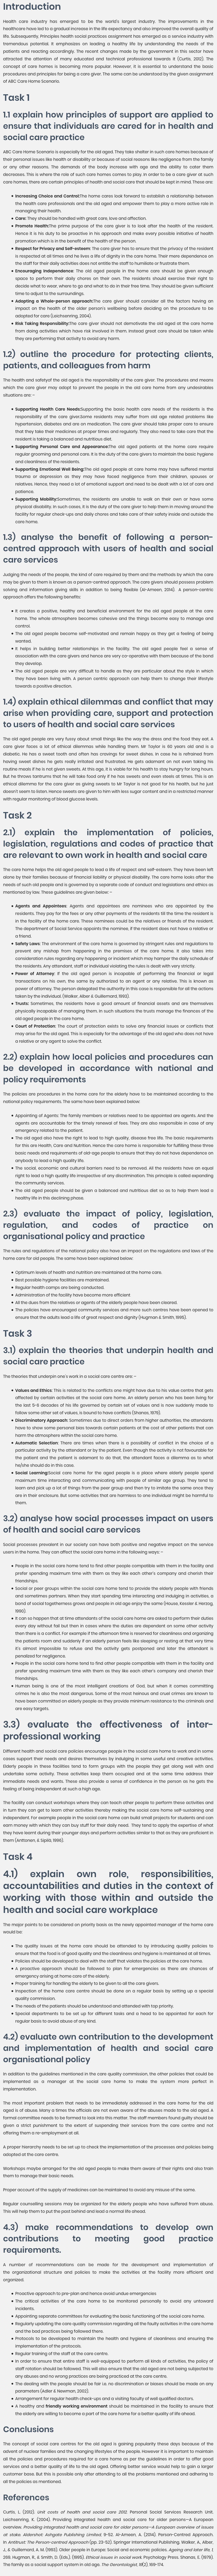 Unit 2 Principles of Health and Social Practice Assignment